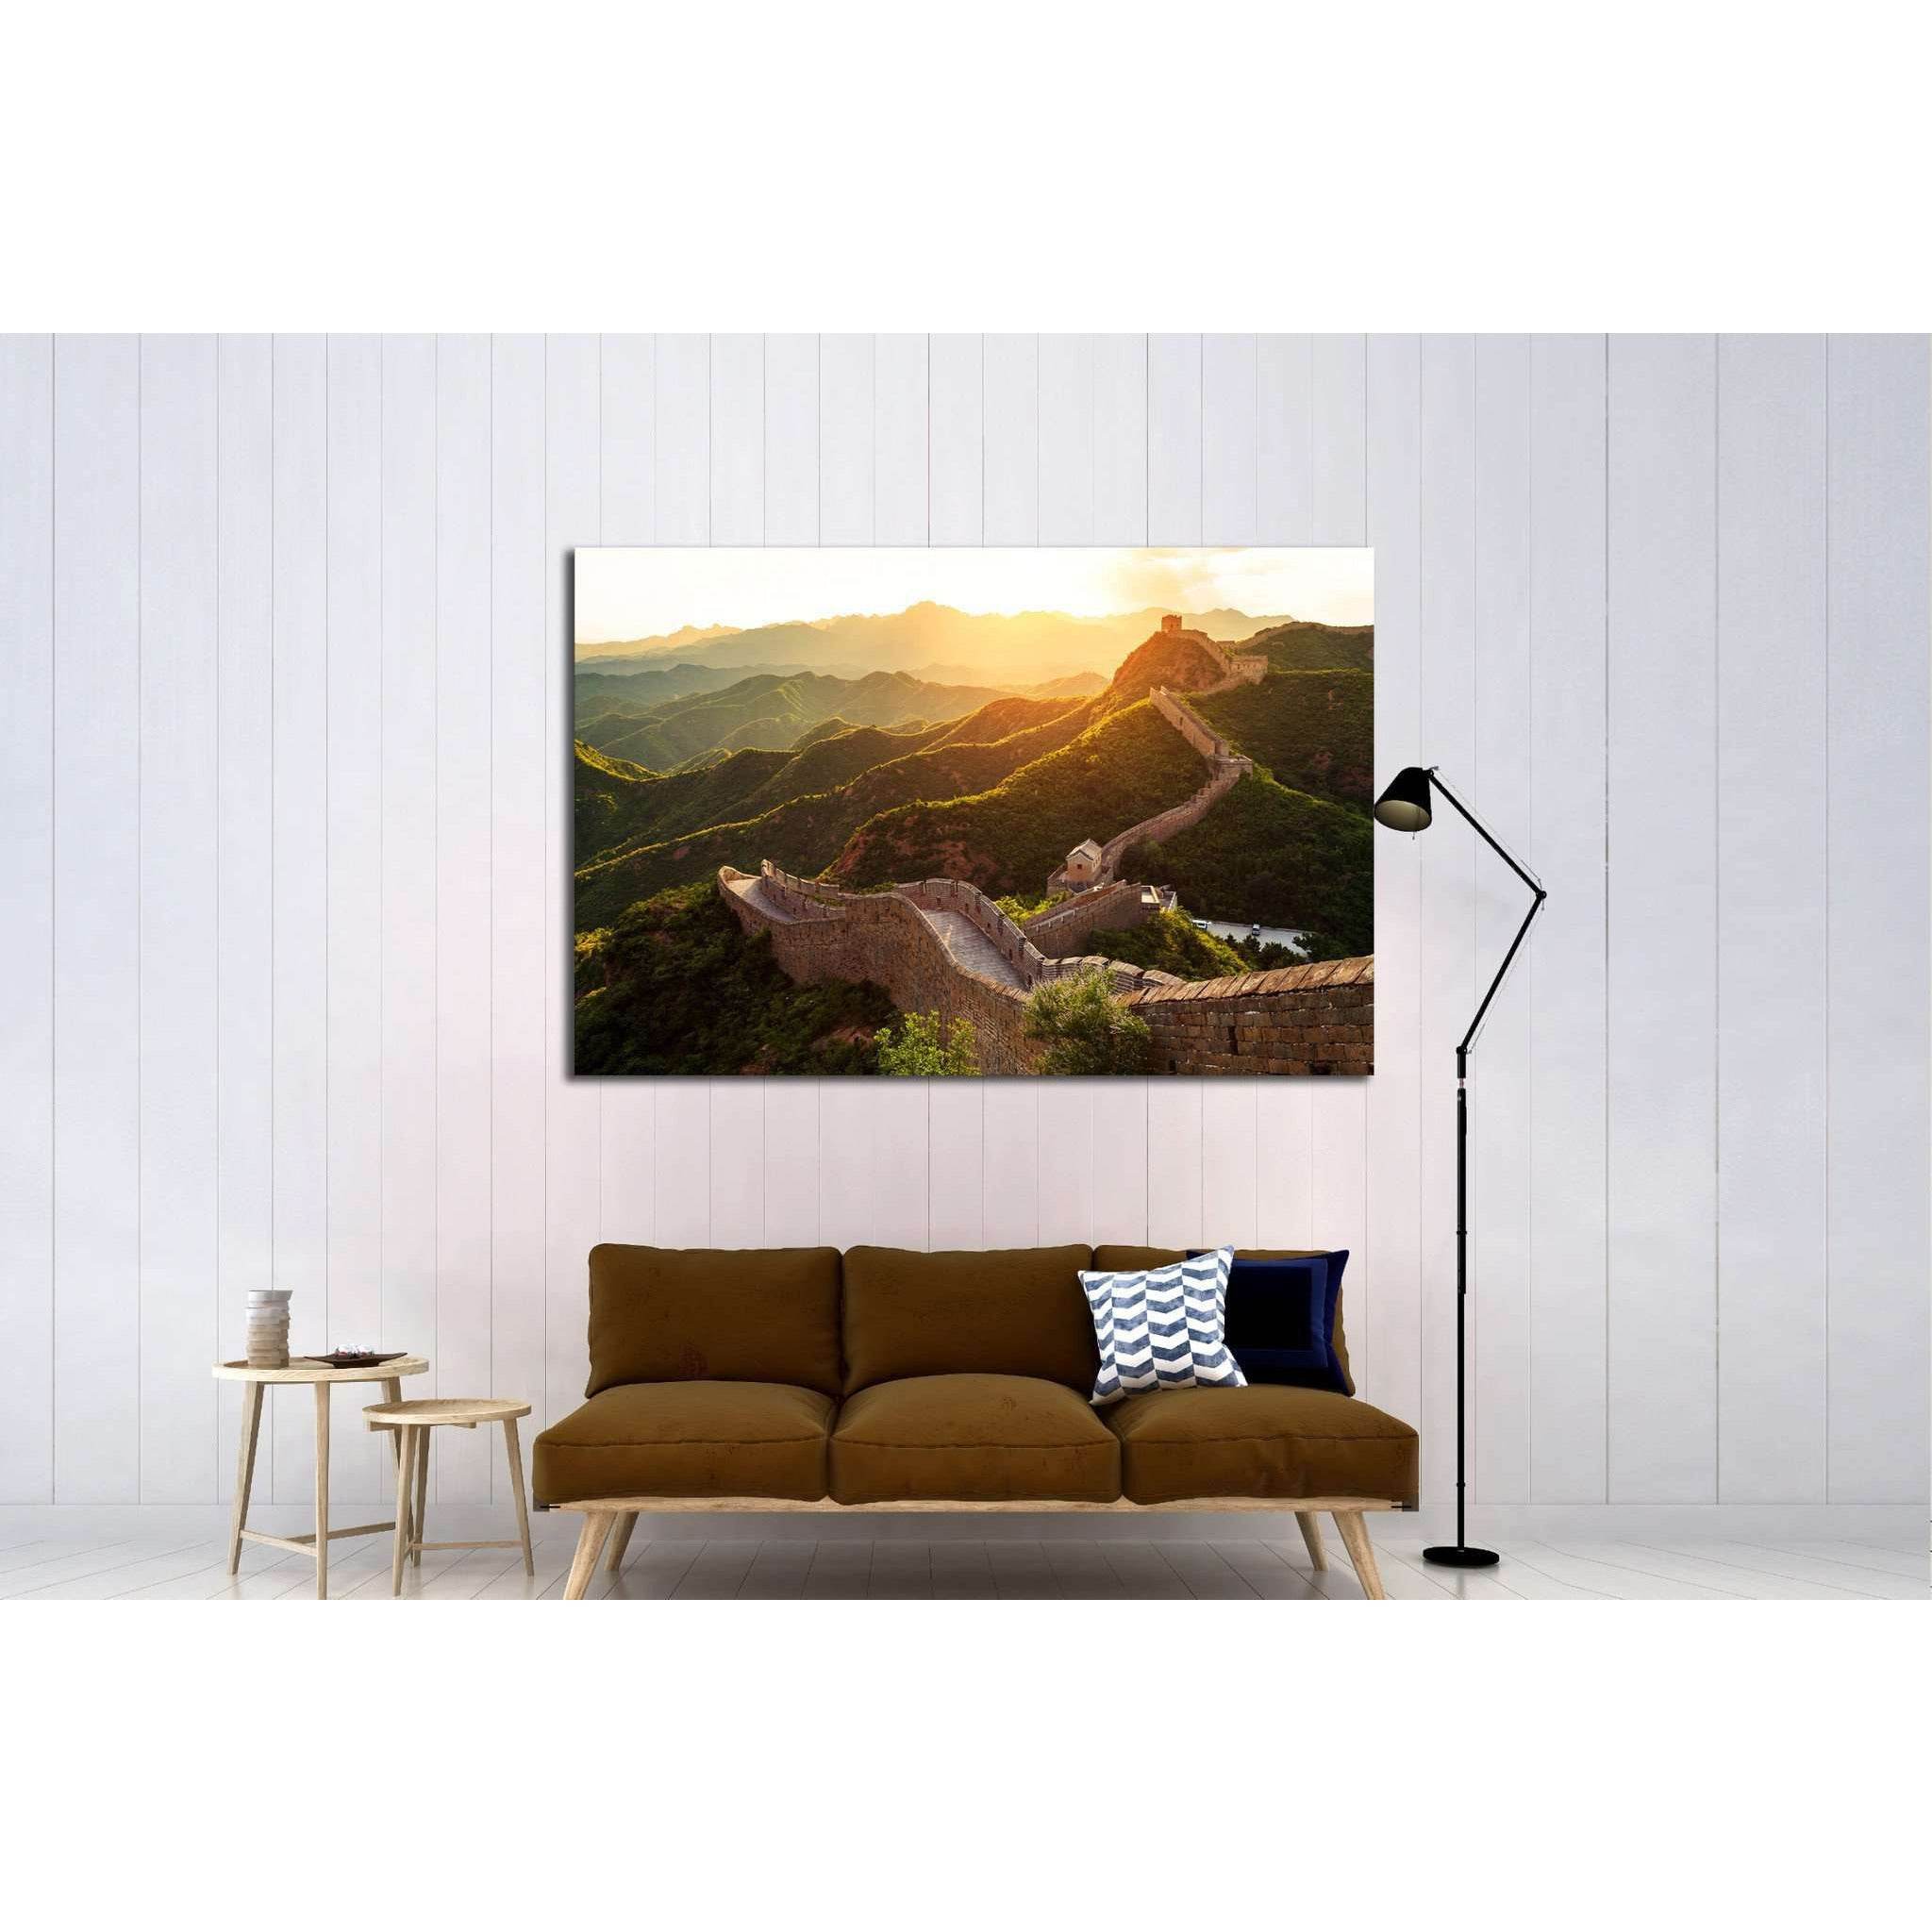 Great wall under sunshine during sunset №1901 Ready to Hang Canvas Print